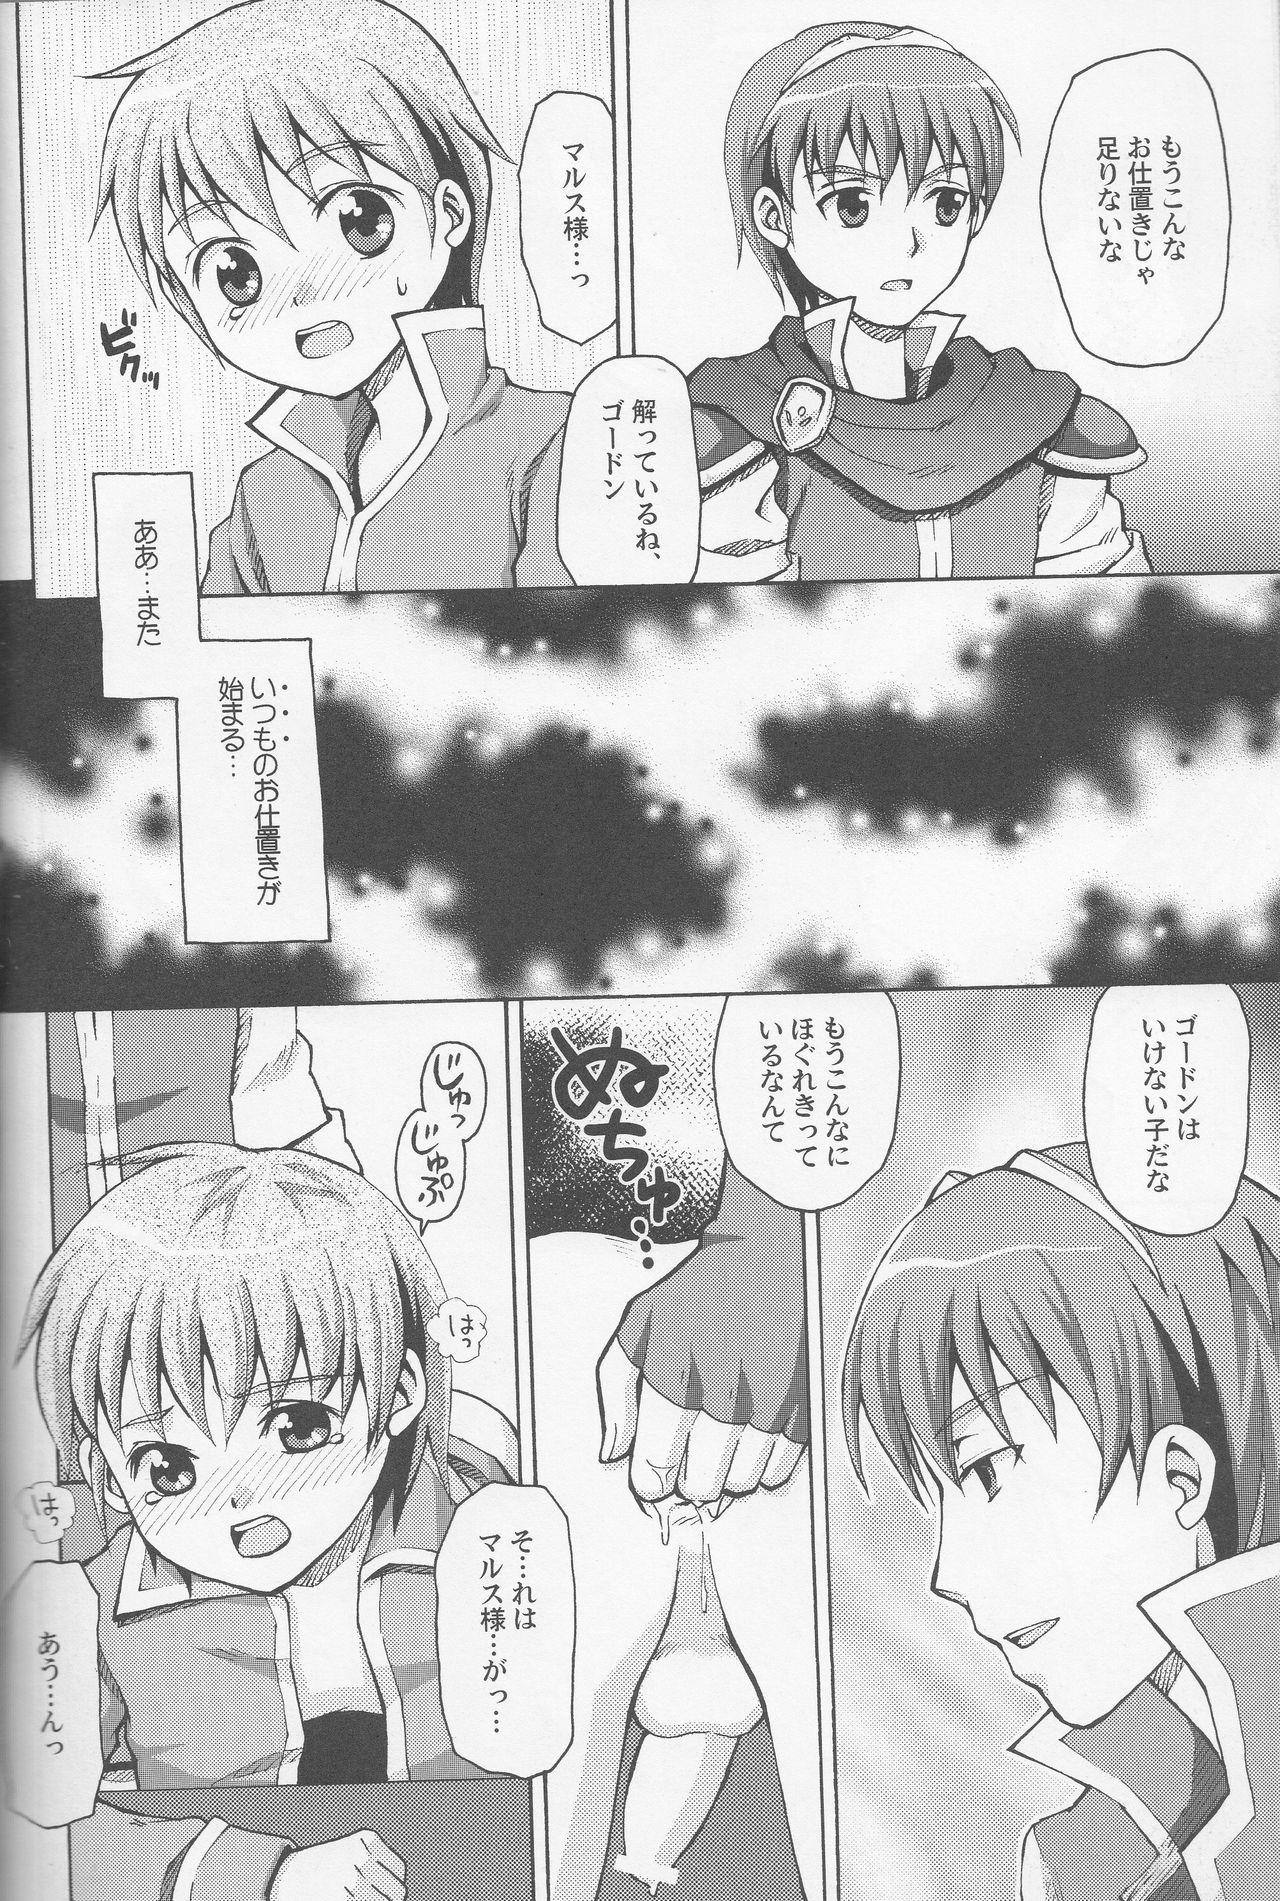 Oiled お許しください、マルス様 - Fire emblem mystery of the emblem | fire emblem monshou no nazo Clit - Page 7